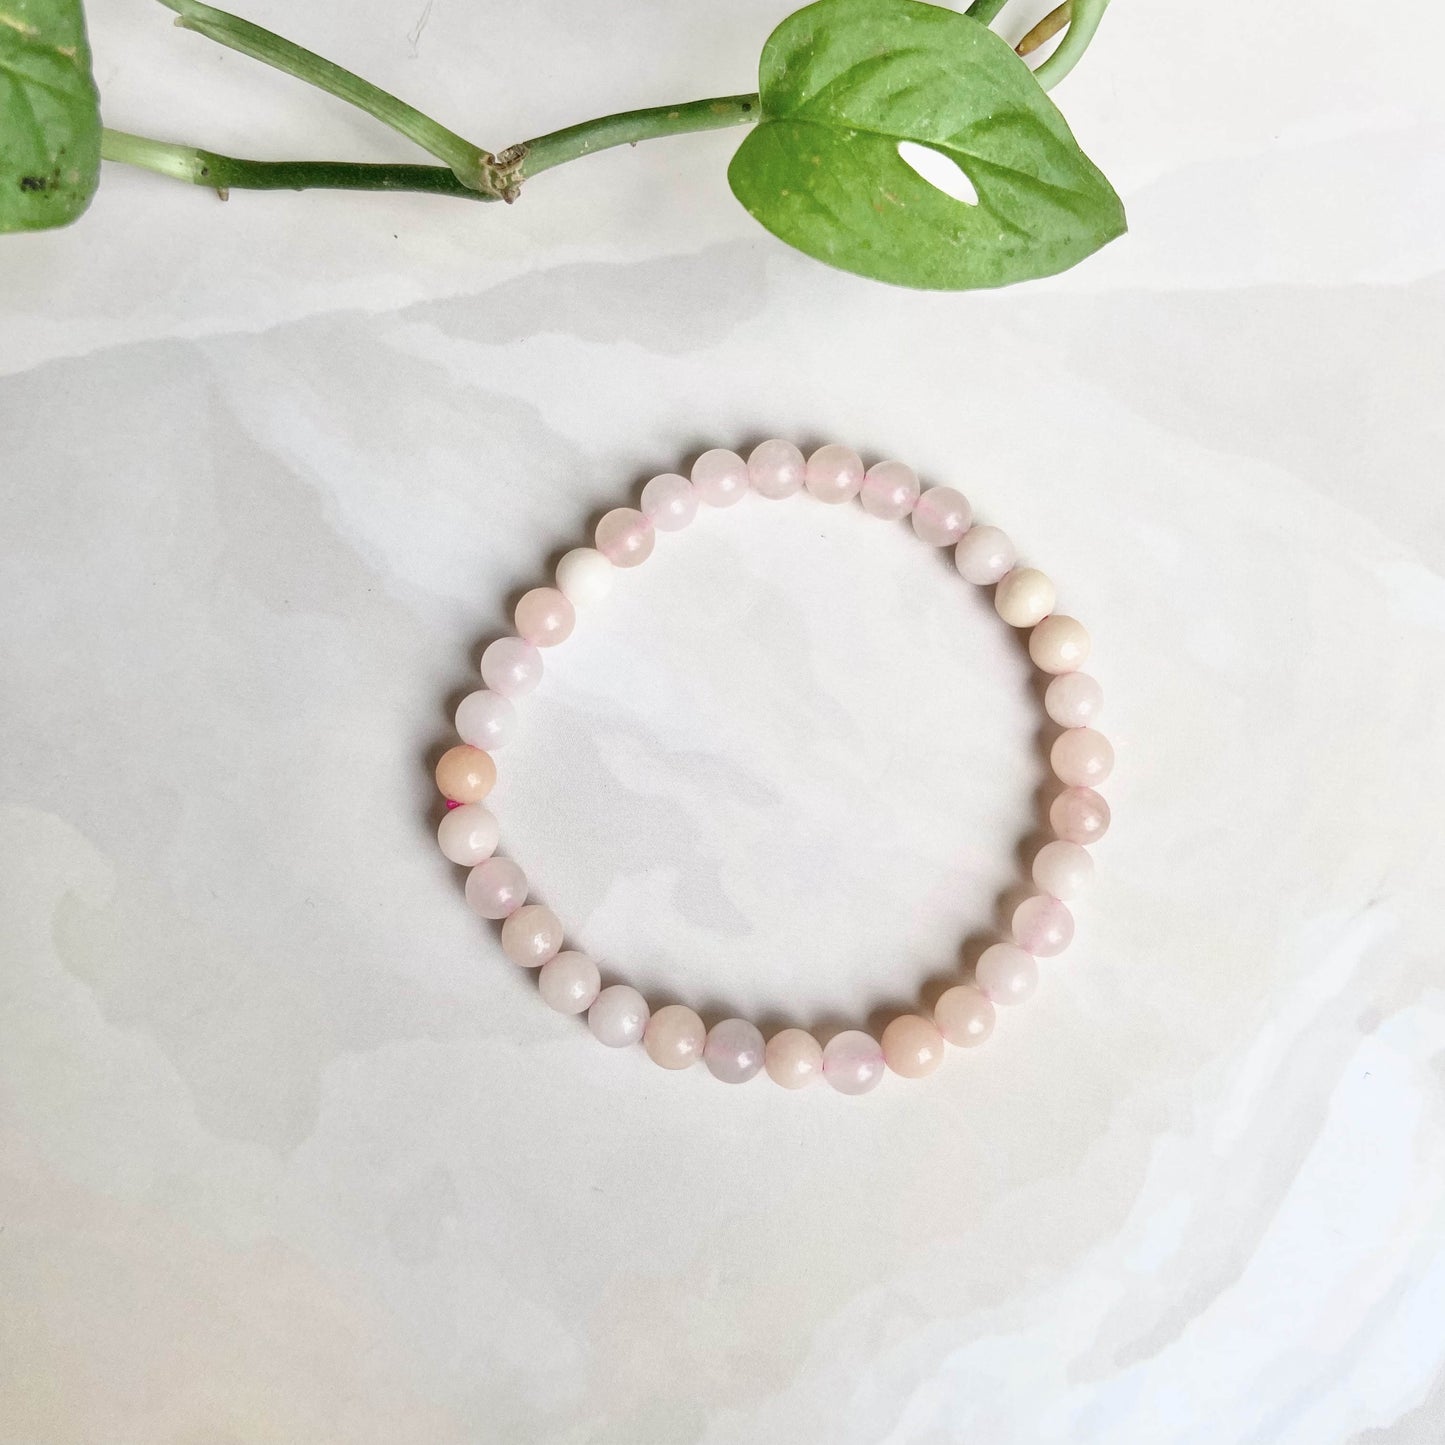 Pink Aventurine Bead Bracelet - 6mm |  Helps ease anxiety and balance heart chakra